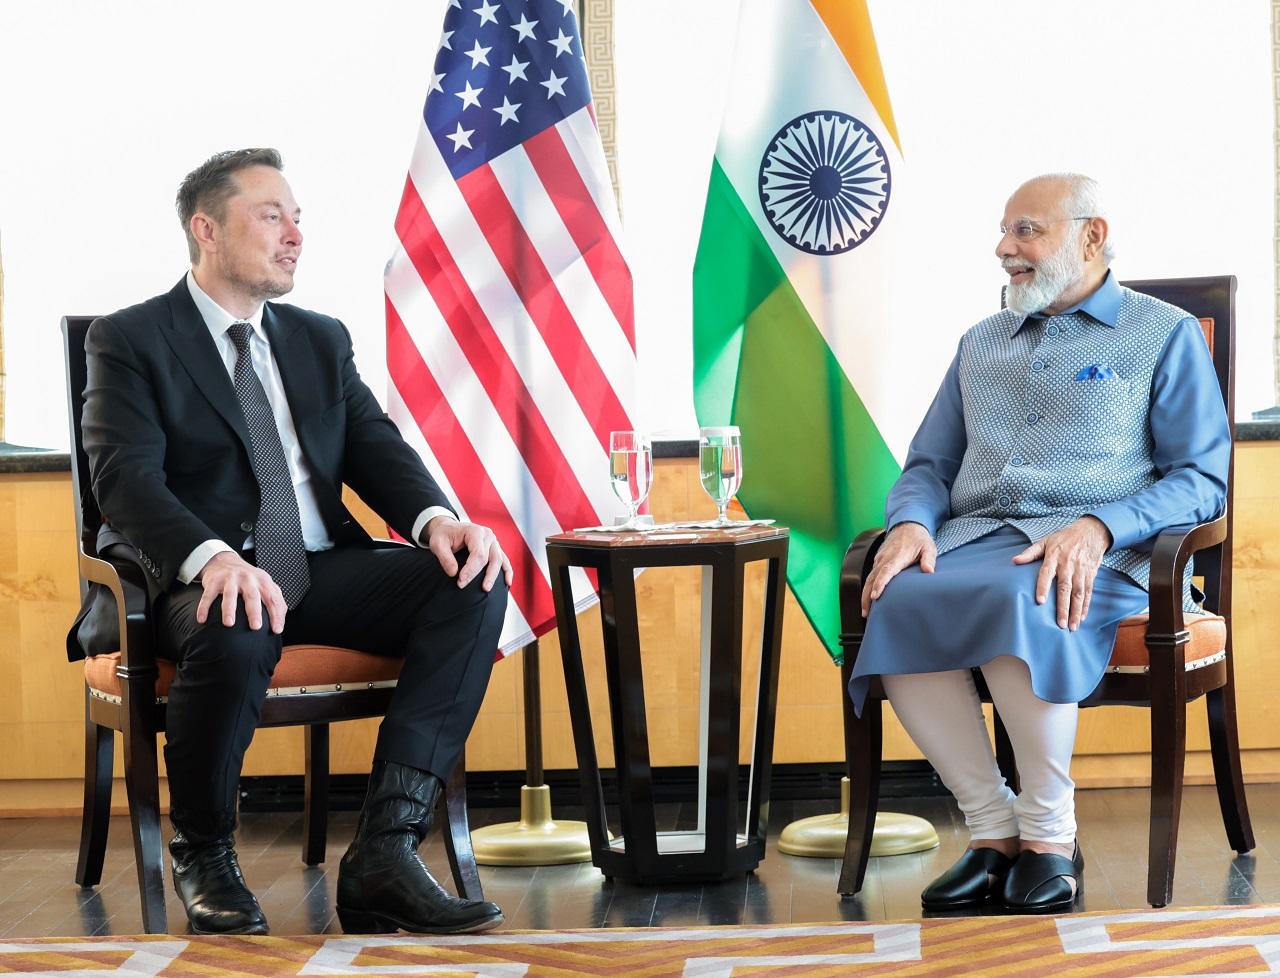 Prime Minister Narendra Modi on Tuesday met prominent US personalities from different walks of life, including Tesla CEO Elon Musk